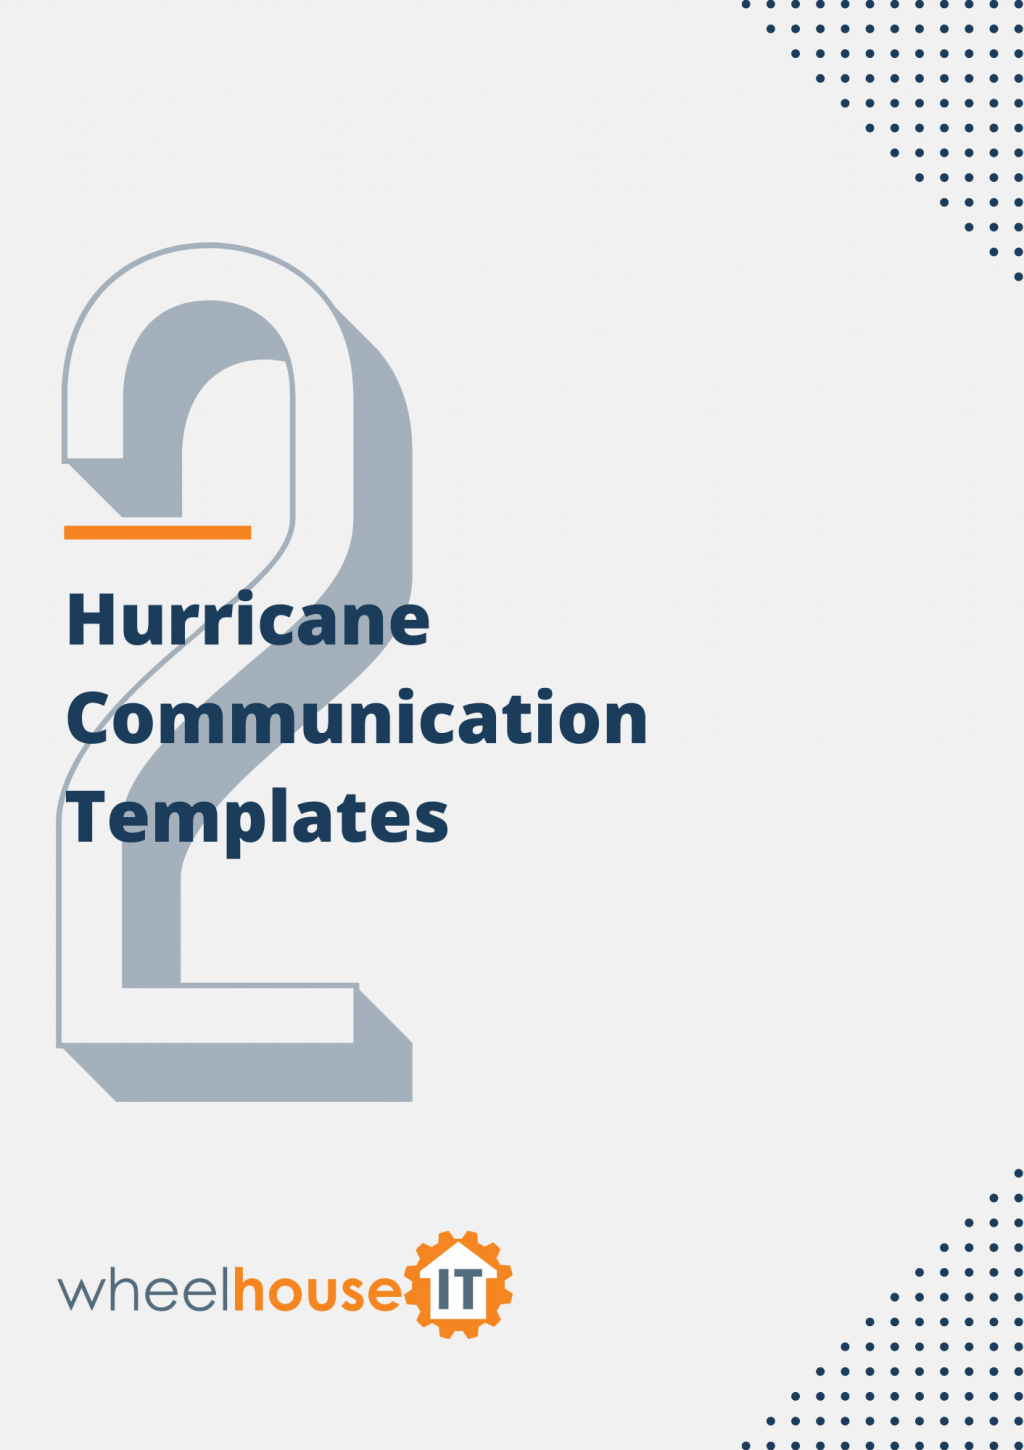 the cover for hurricane communication templates